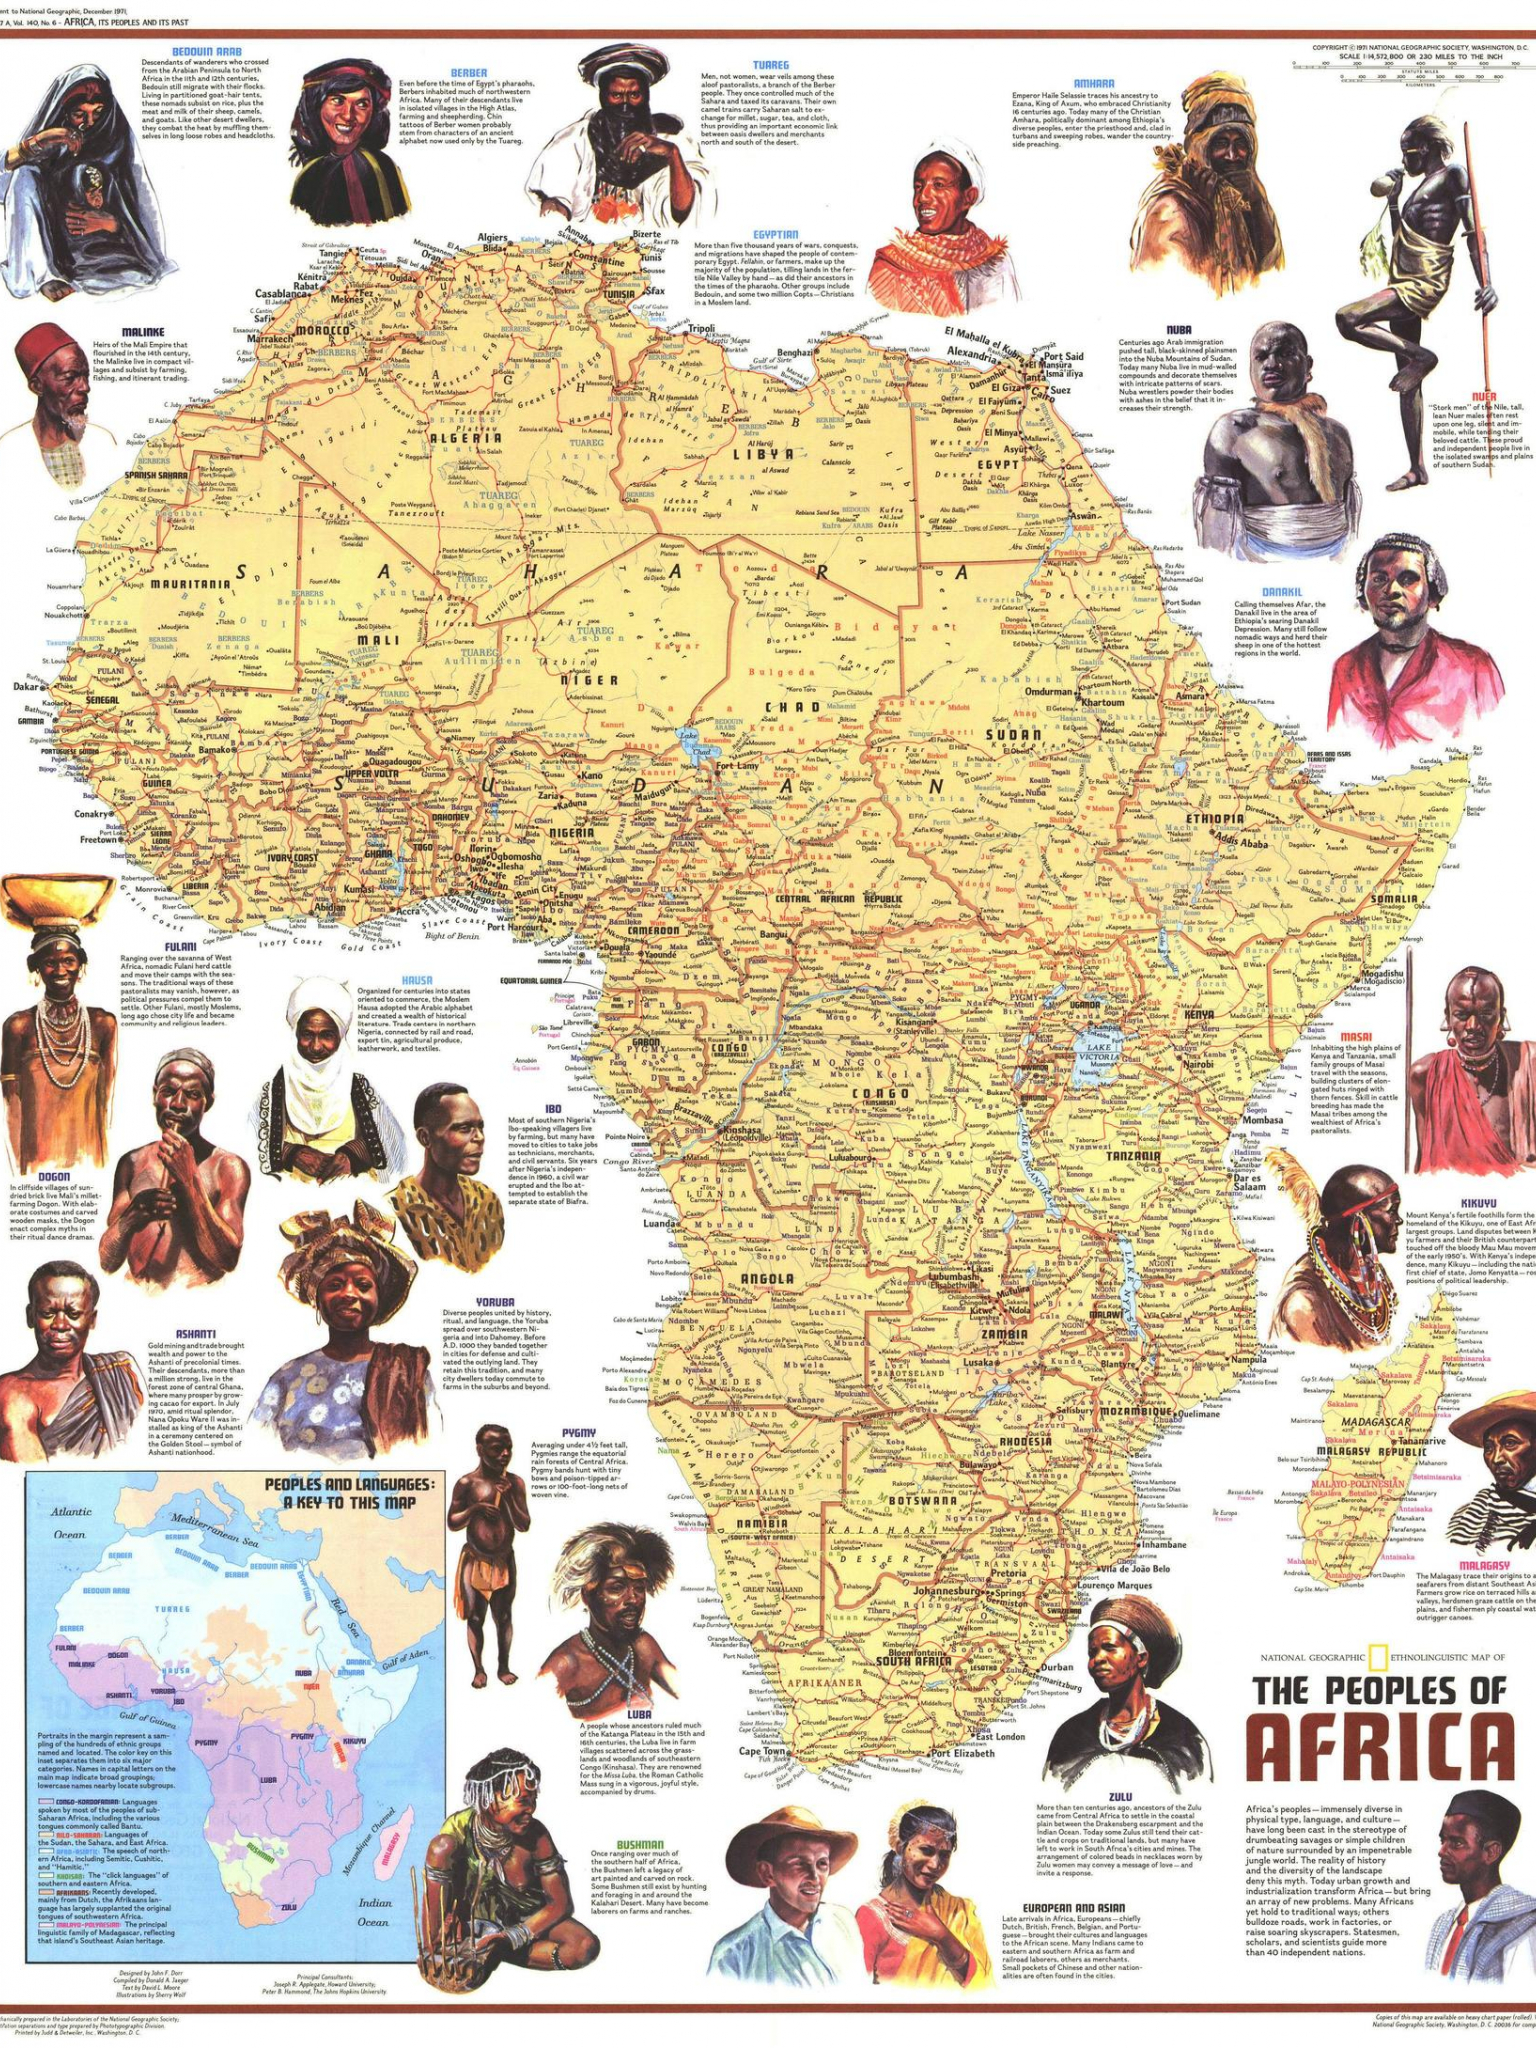 Free download Image For Africa Map Wallpaper [1754x2179] for your Desktop, Mobile & Tablet. Explore Africa Map Wallpaper. South Africa Wallpaper, Cape Town South Africa Wallpaper